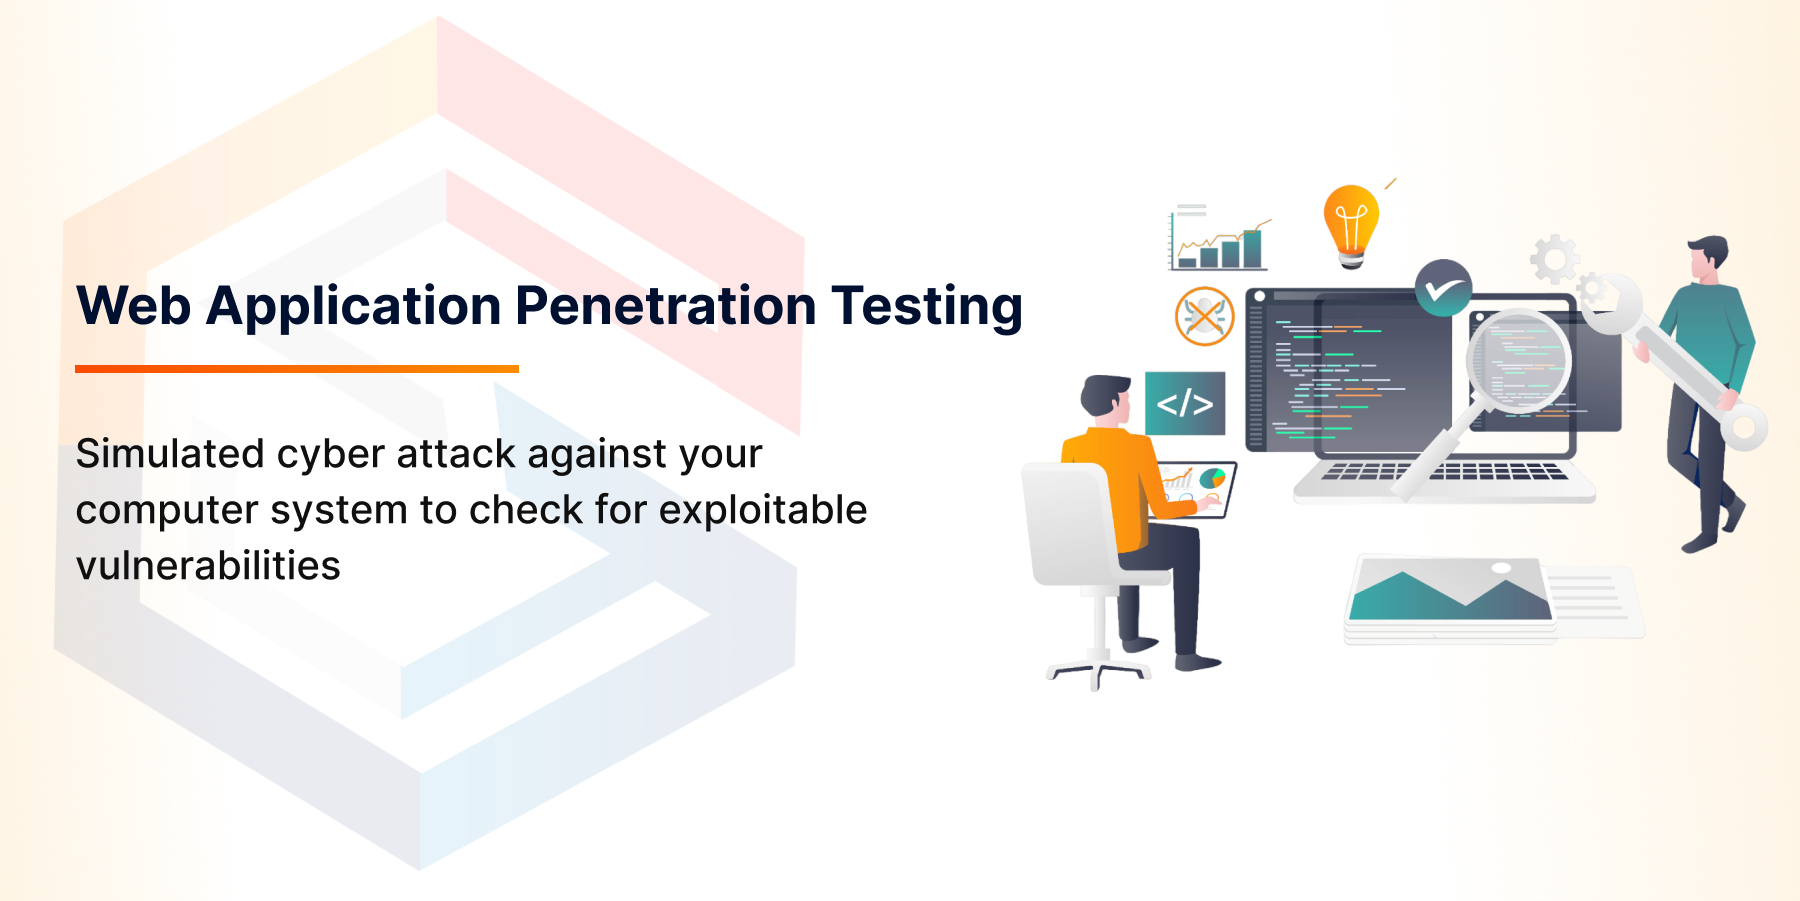 What is Web Application Penetration Testing?